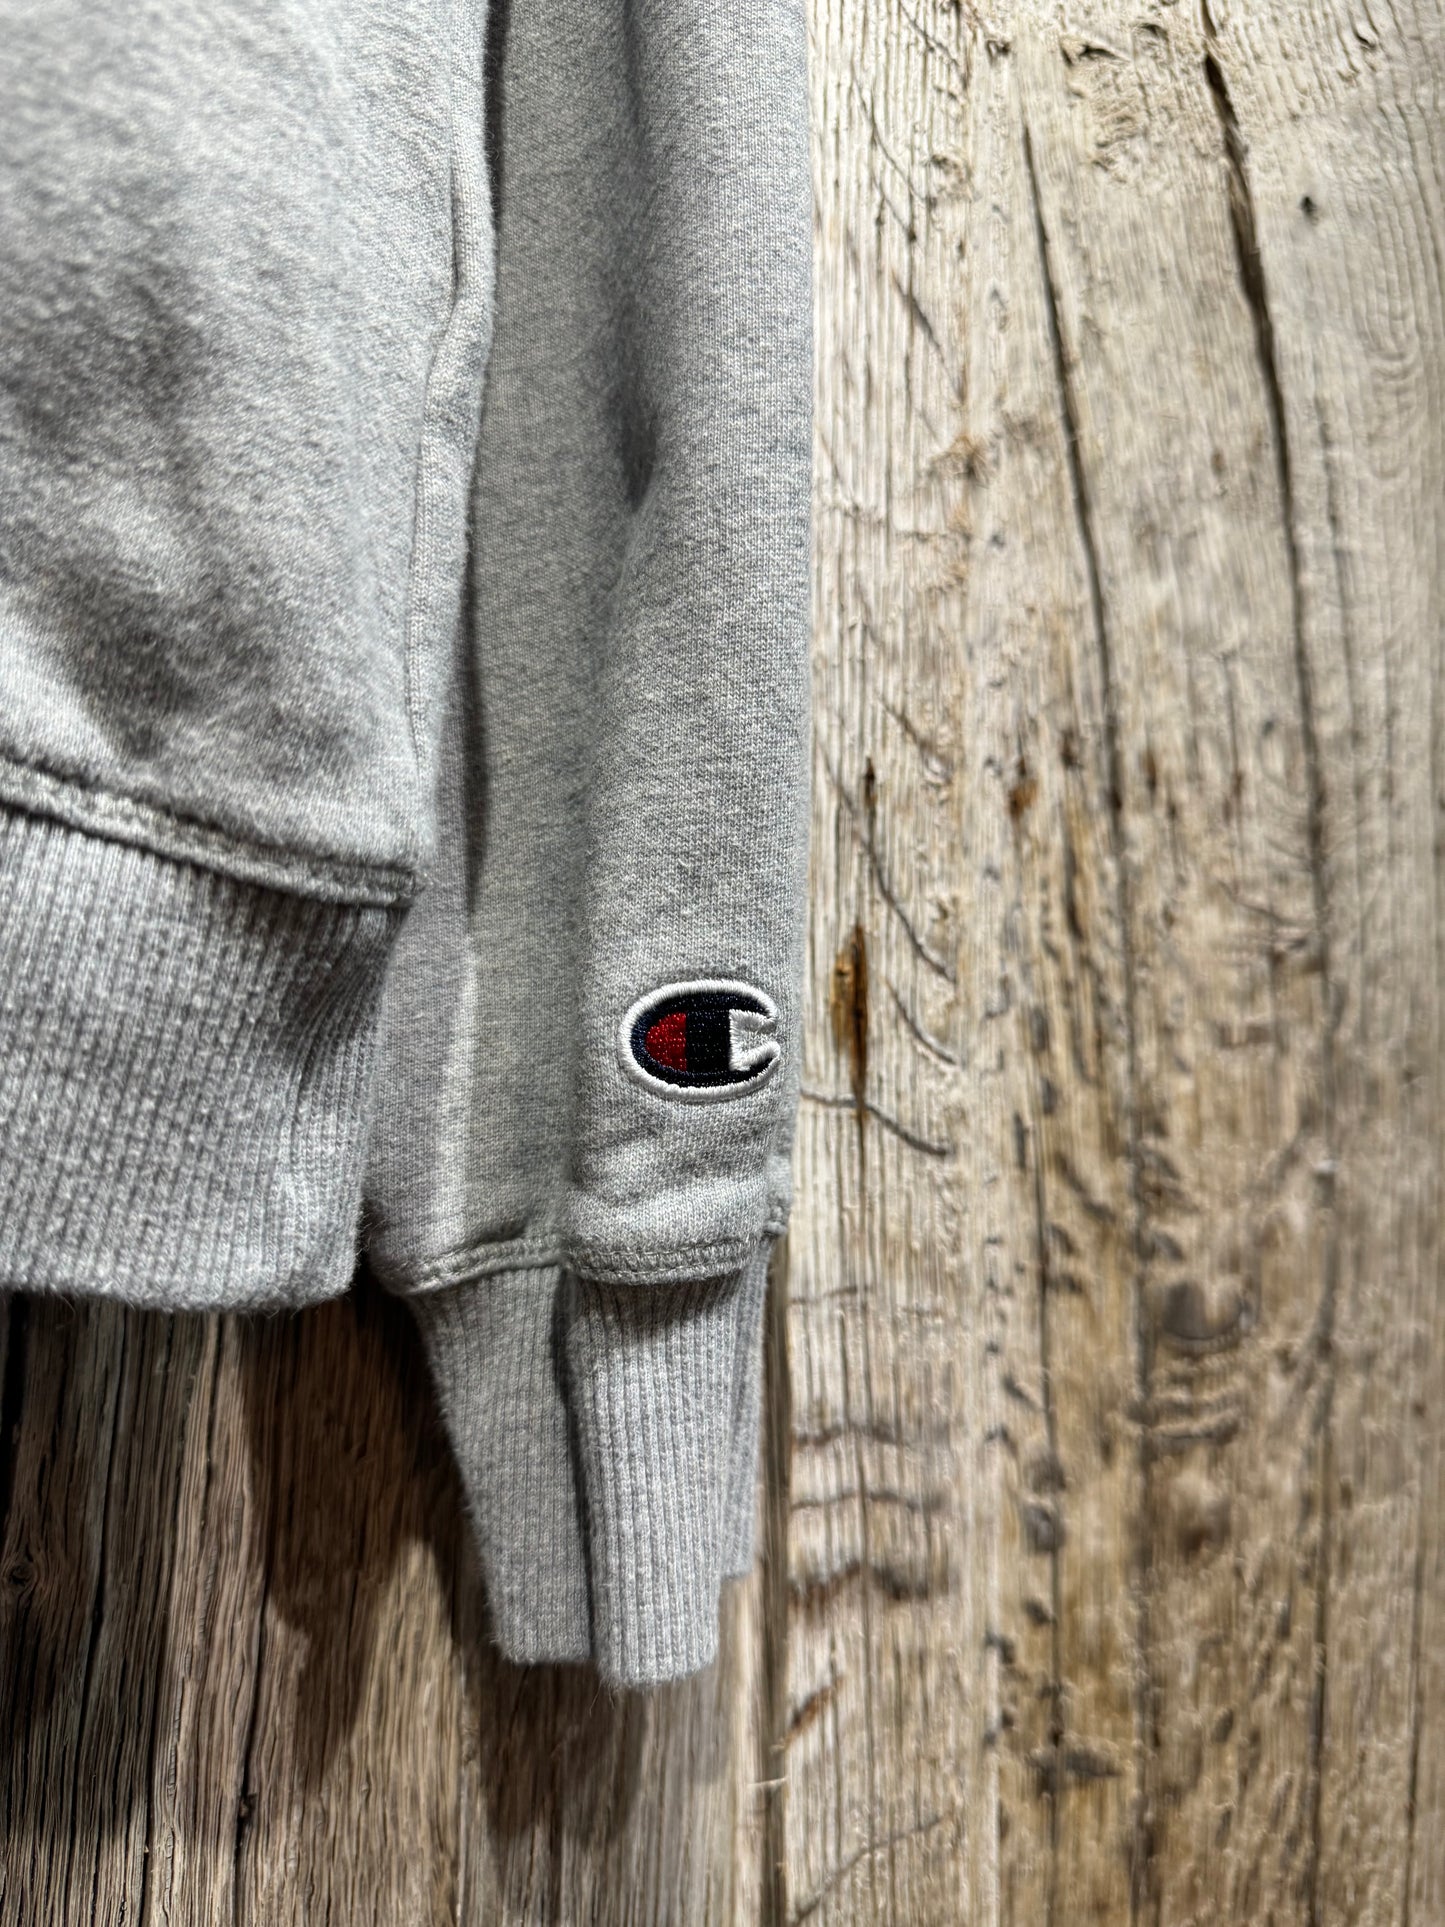 Grey Champion Embroidered Hoodie